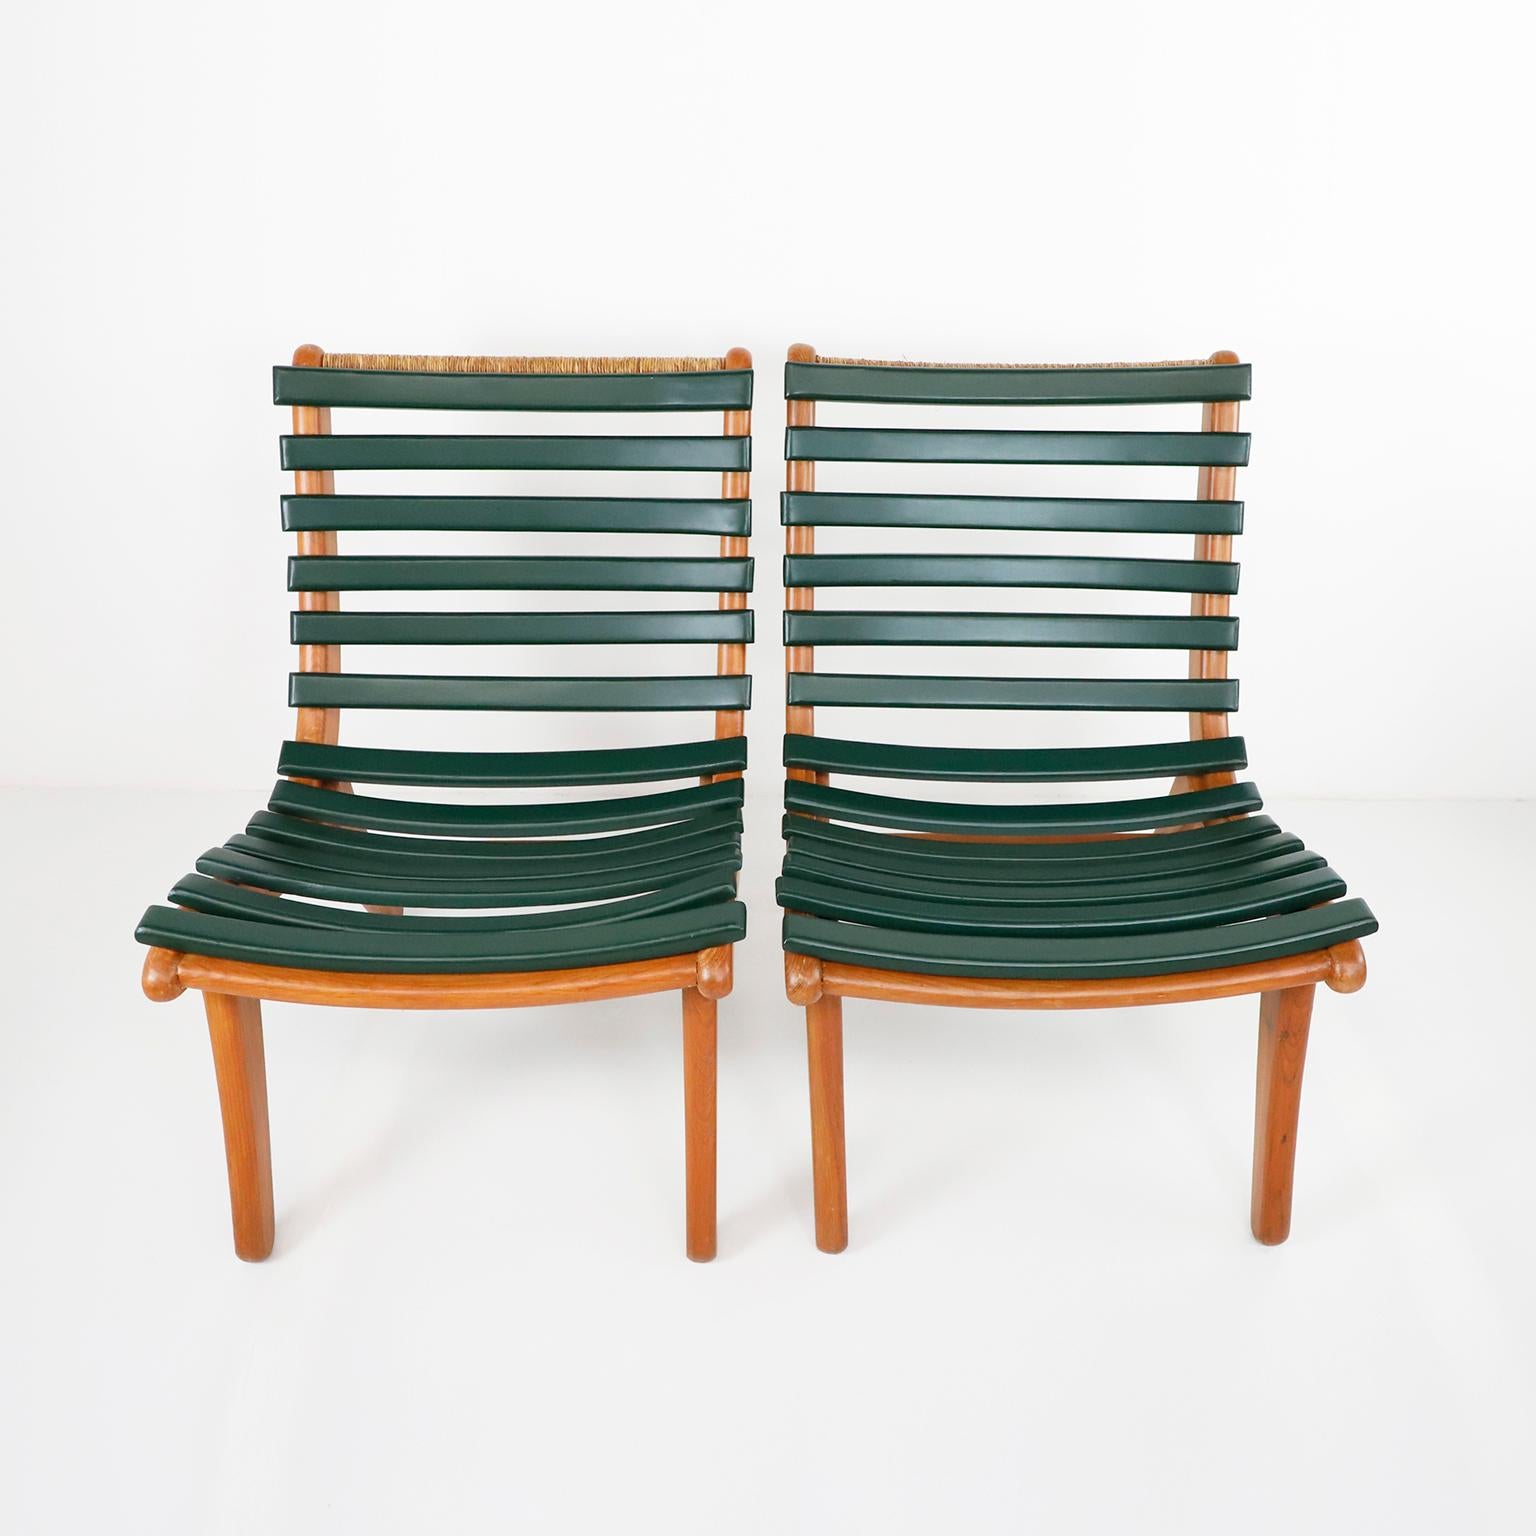 Circa 1950. We offer this pair of Mexican San Miguelito Easy Chairs attributed to Michael Van Beuren made in primavera wood an professionally restored.